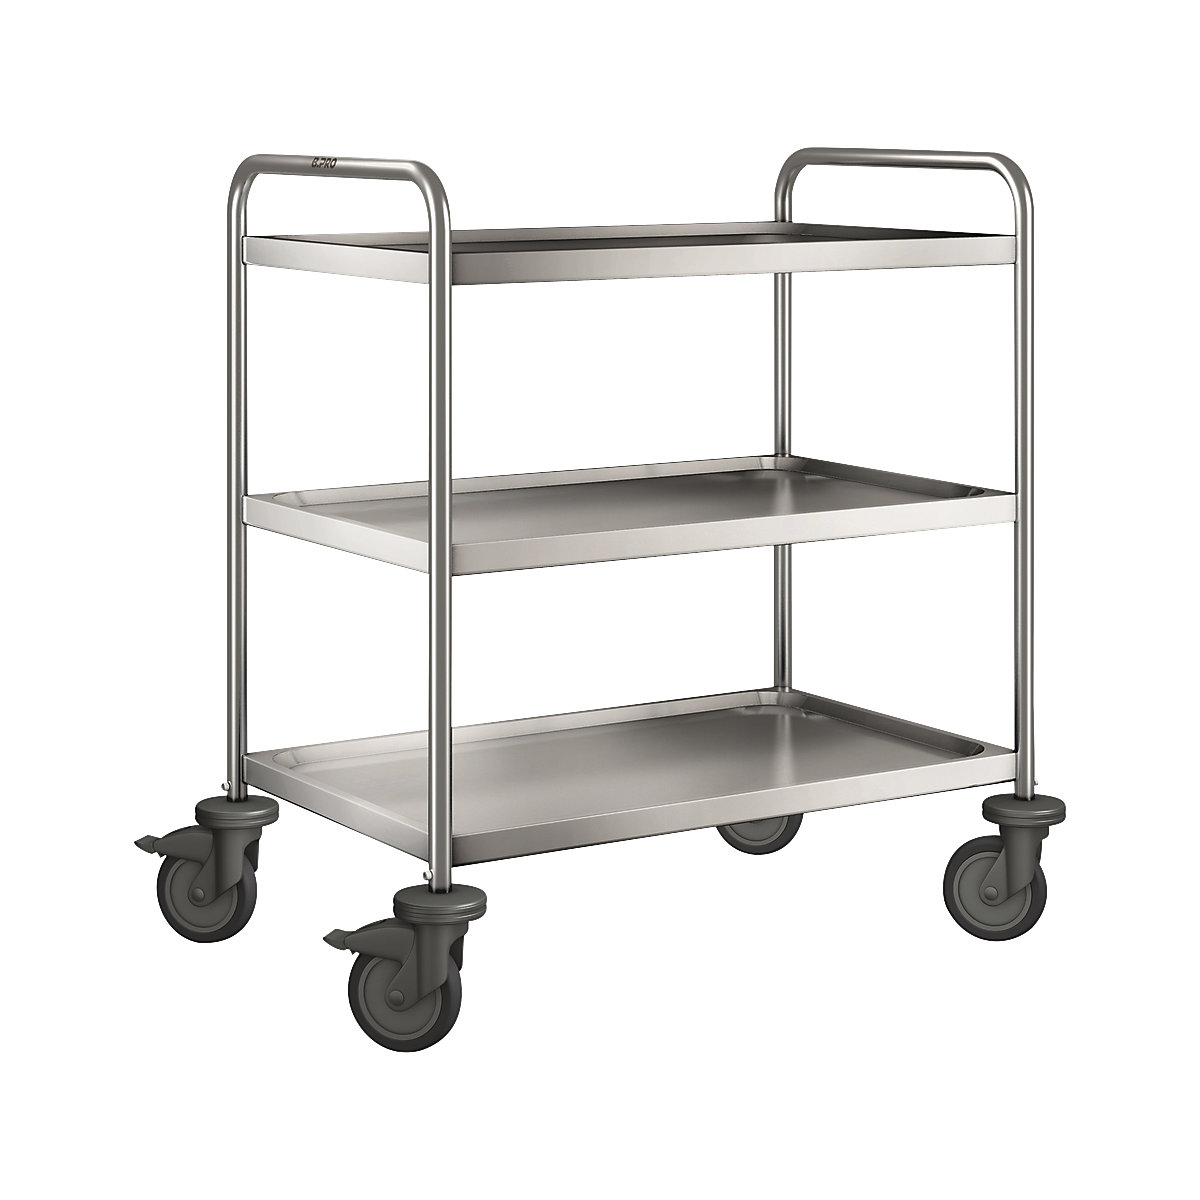 BLANCO stainless steel serving trolley – B.PRO, with 3 shelves, LxWxH 900 x 600 x 950 mm-1